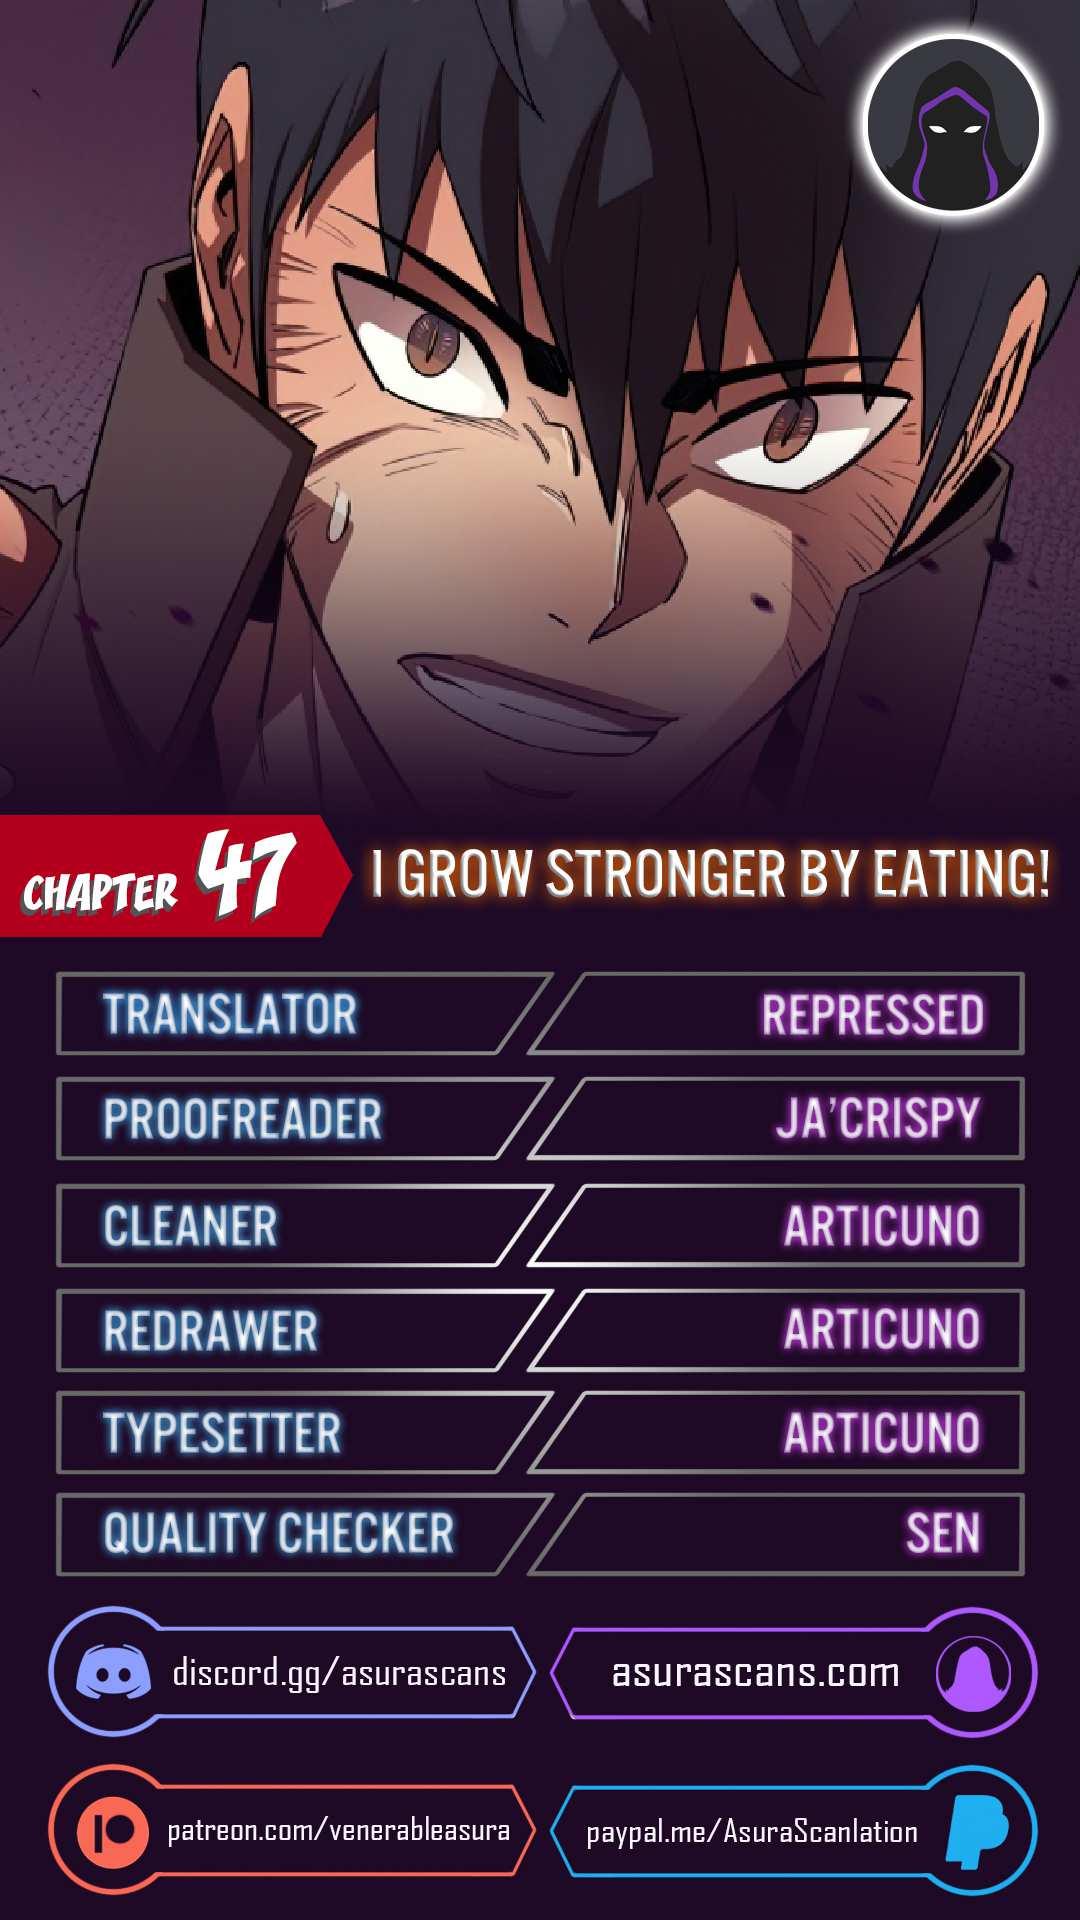 I Get Stronger By Eating Read I Grow Stronger By Eating! Chapter 47 on Mangakakalot